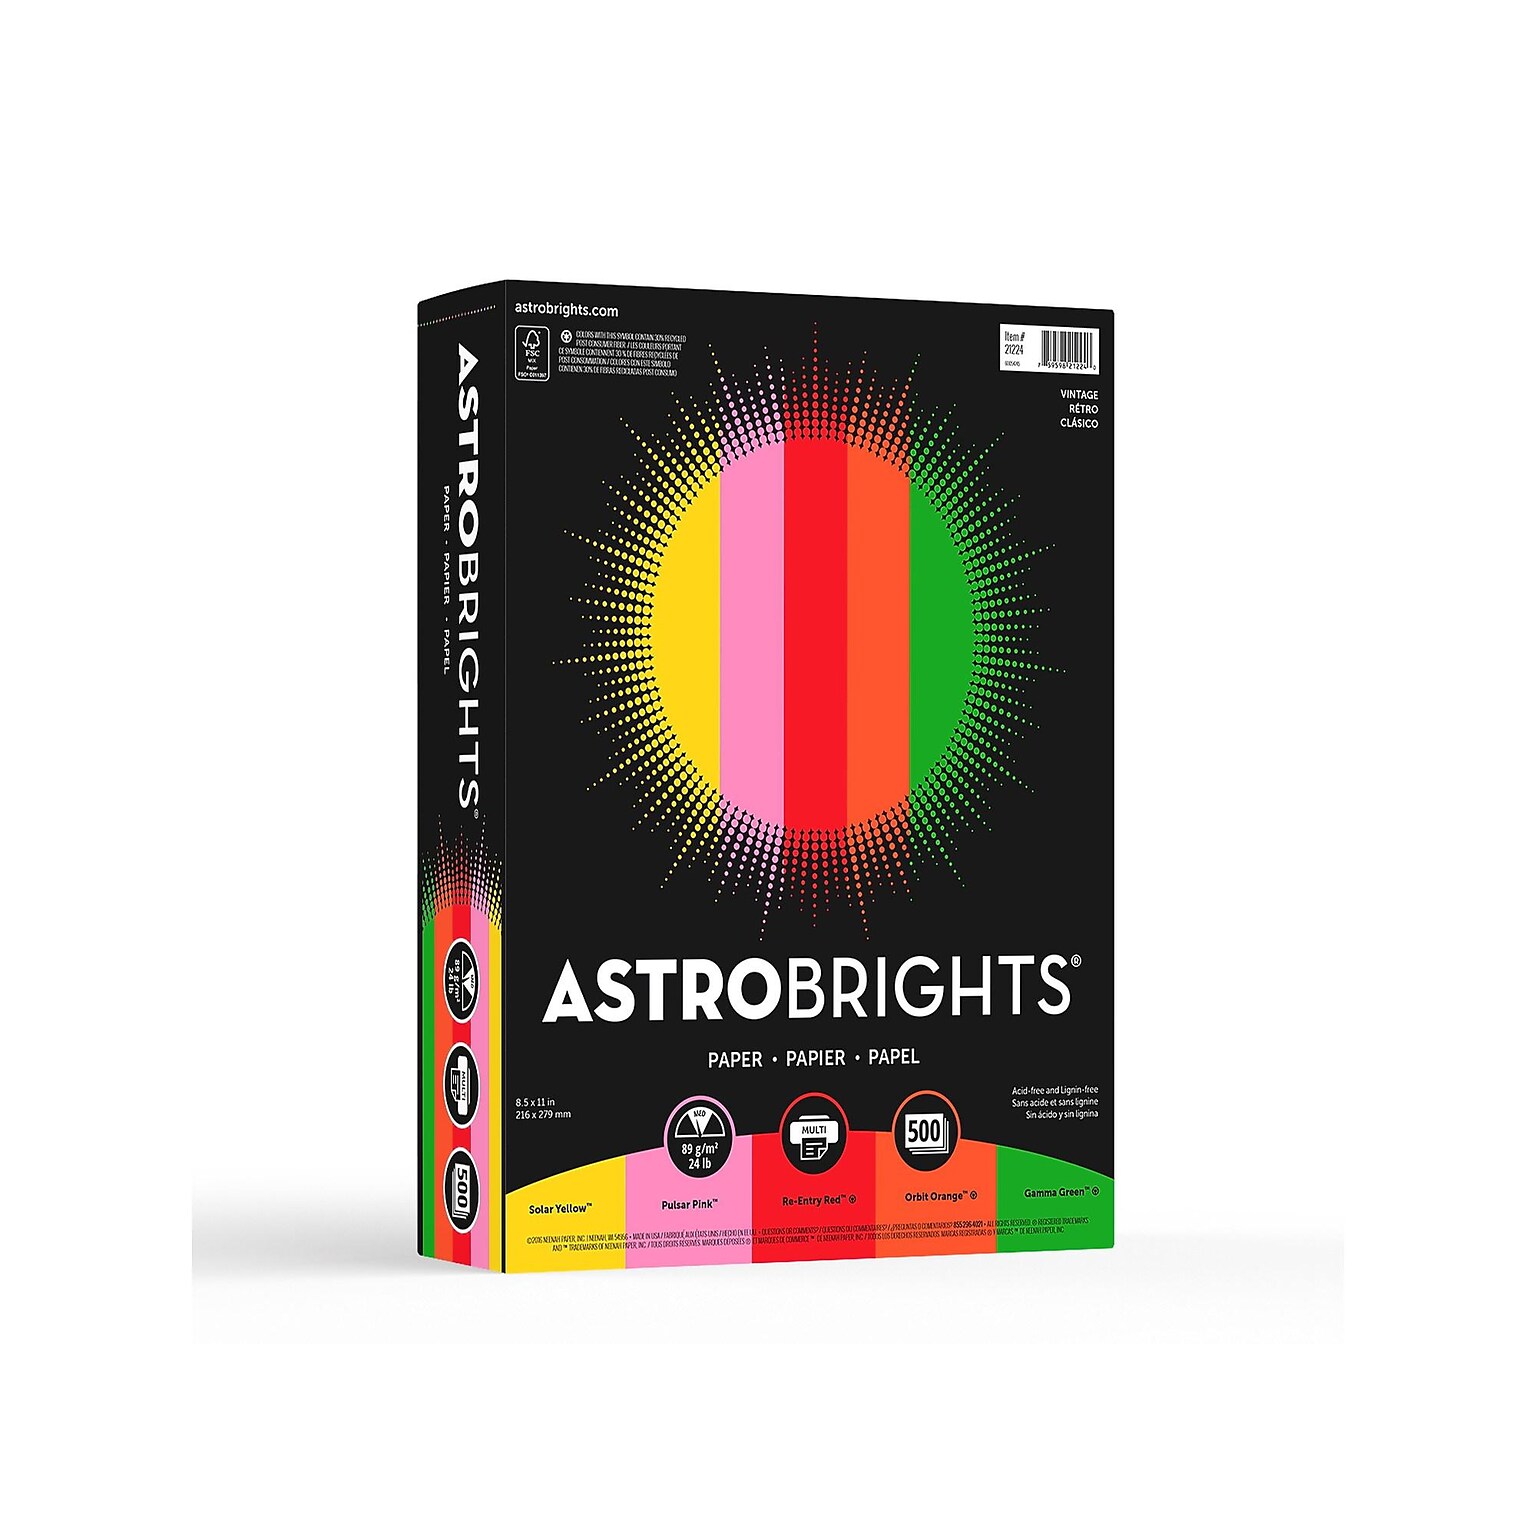 Astrobrights Vintage Multipurpose Paper, 24 lbs., 8.5 x 11, Assorted Colors, 500 Sheets/Pack (21224)